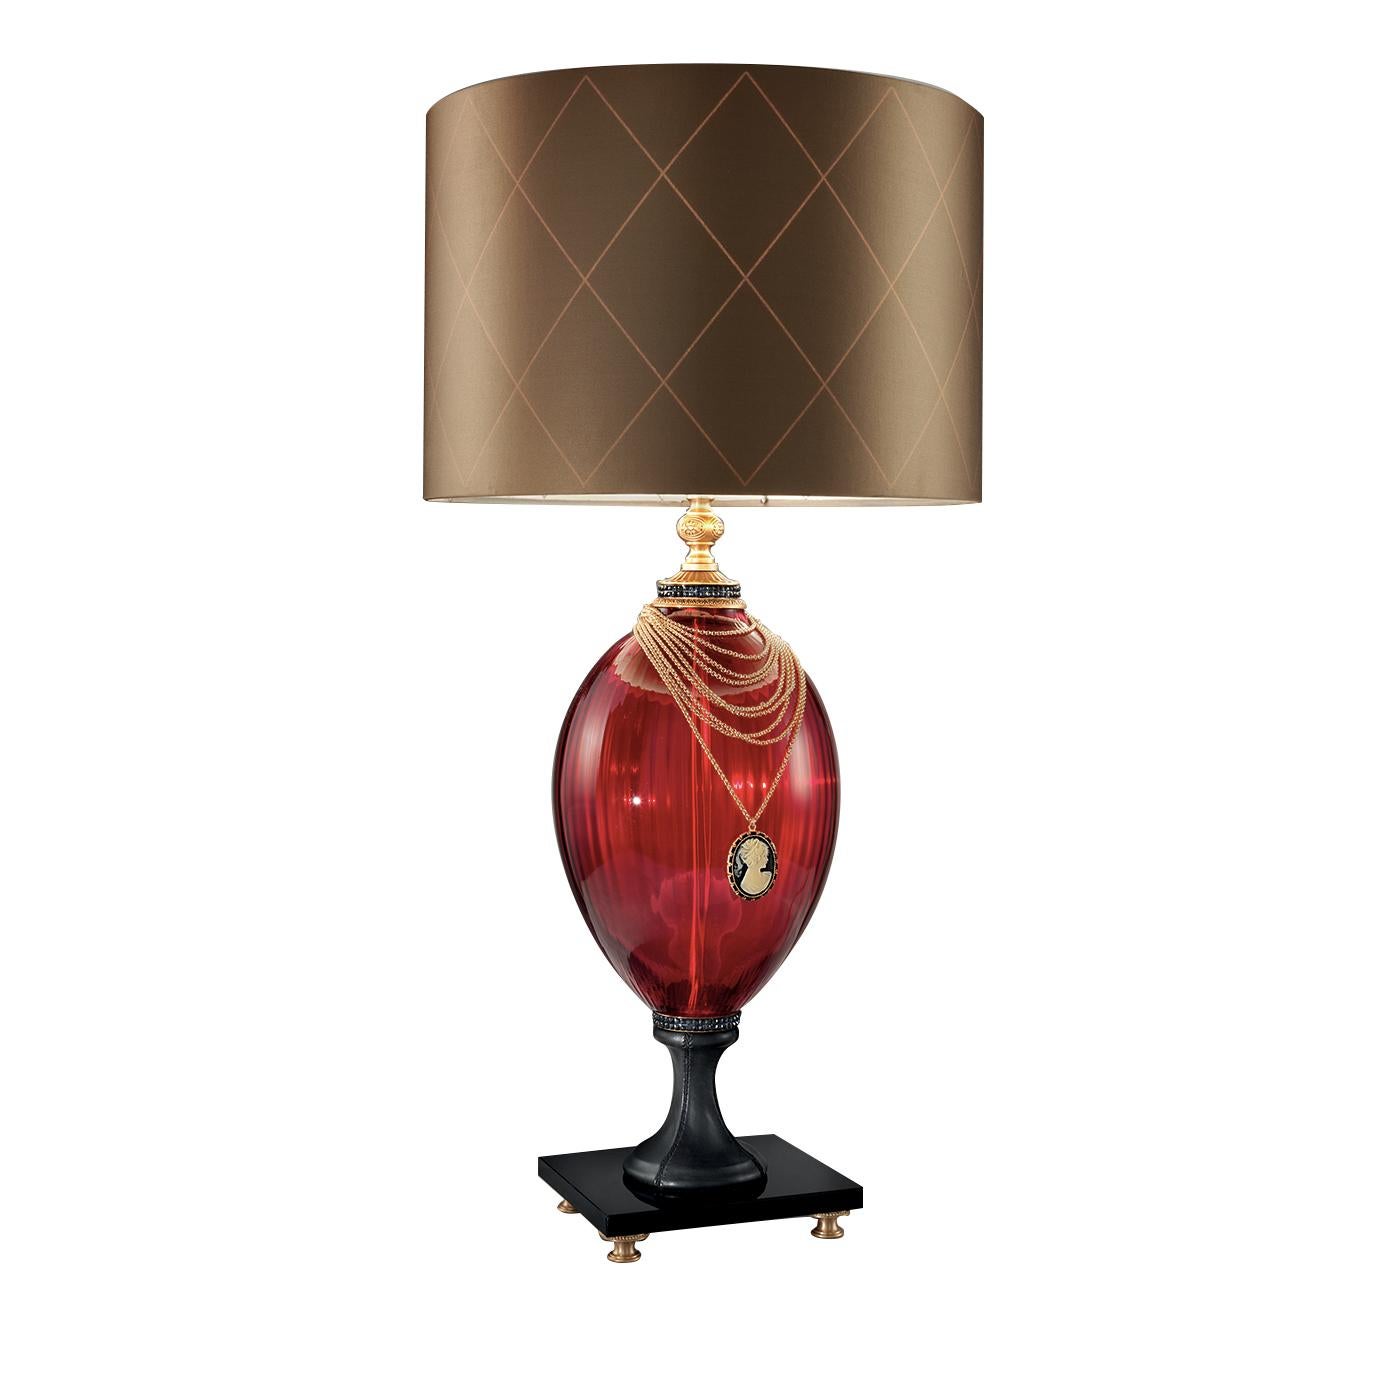 Blending timeless style with a vintage charm, this stunning lamp is a true masterpiece. This elegant lamp sports a silhouette with a ruby glass body and a dazzling 24-karat gold-plated decorative necklace with cameo. The square marble base with